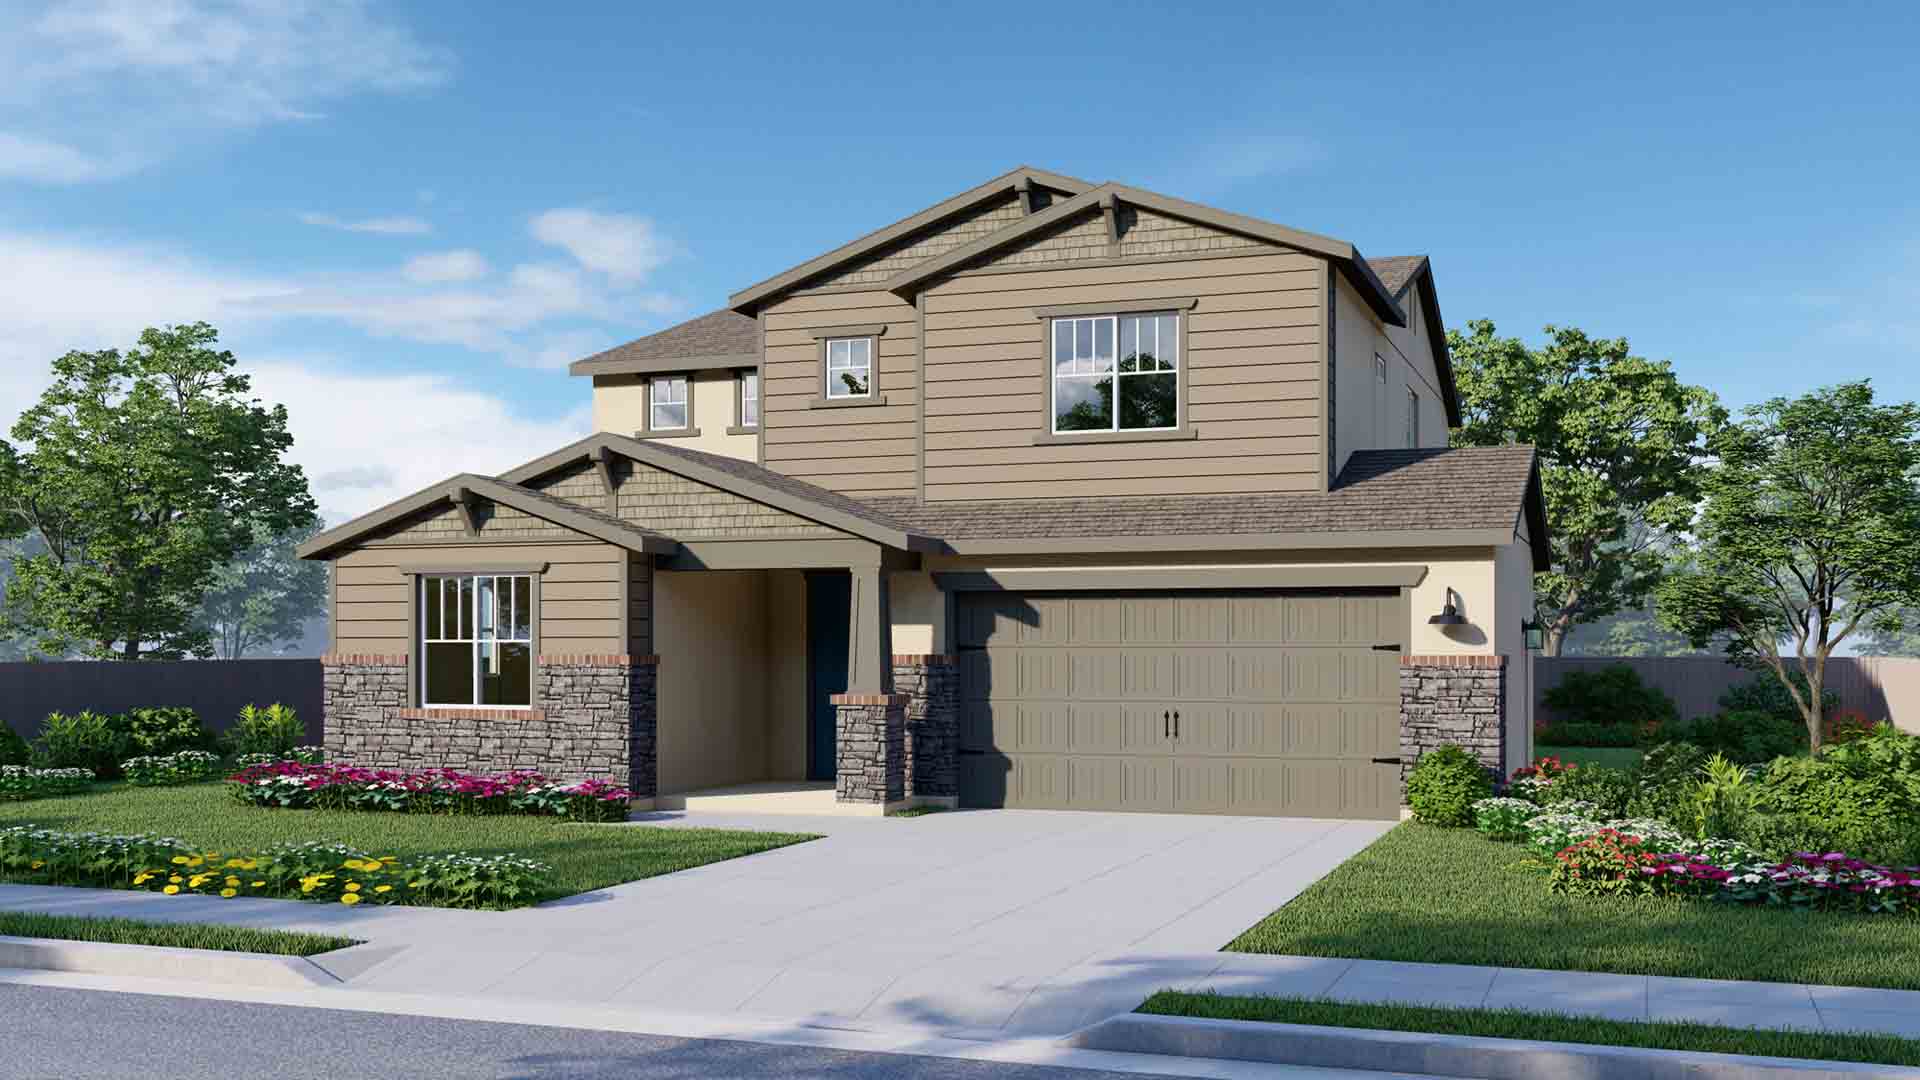 All Elise elevations are two-story homes. The Craftsman elevation features roof detailing that is typical of craftsman-style homes. The model pictured has gray-brown horizontal siding on both the first and second floors. The trim and garage door are also gray-brown. The first floor has decorative stone on the bottom half of the wall. The garage door has paneling and metal accents that give it an elevated look.